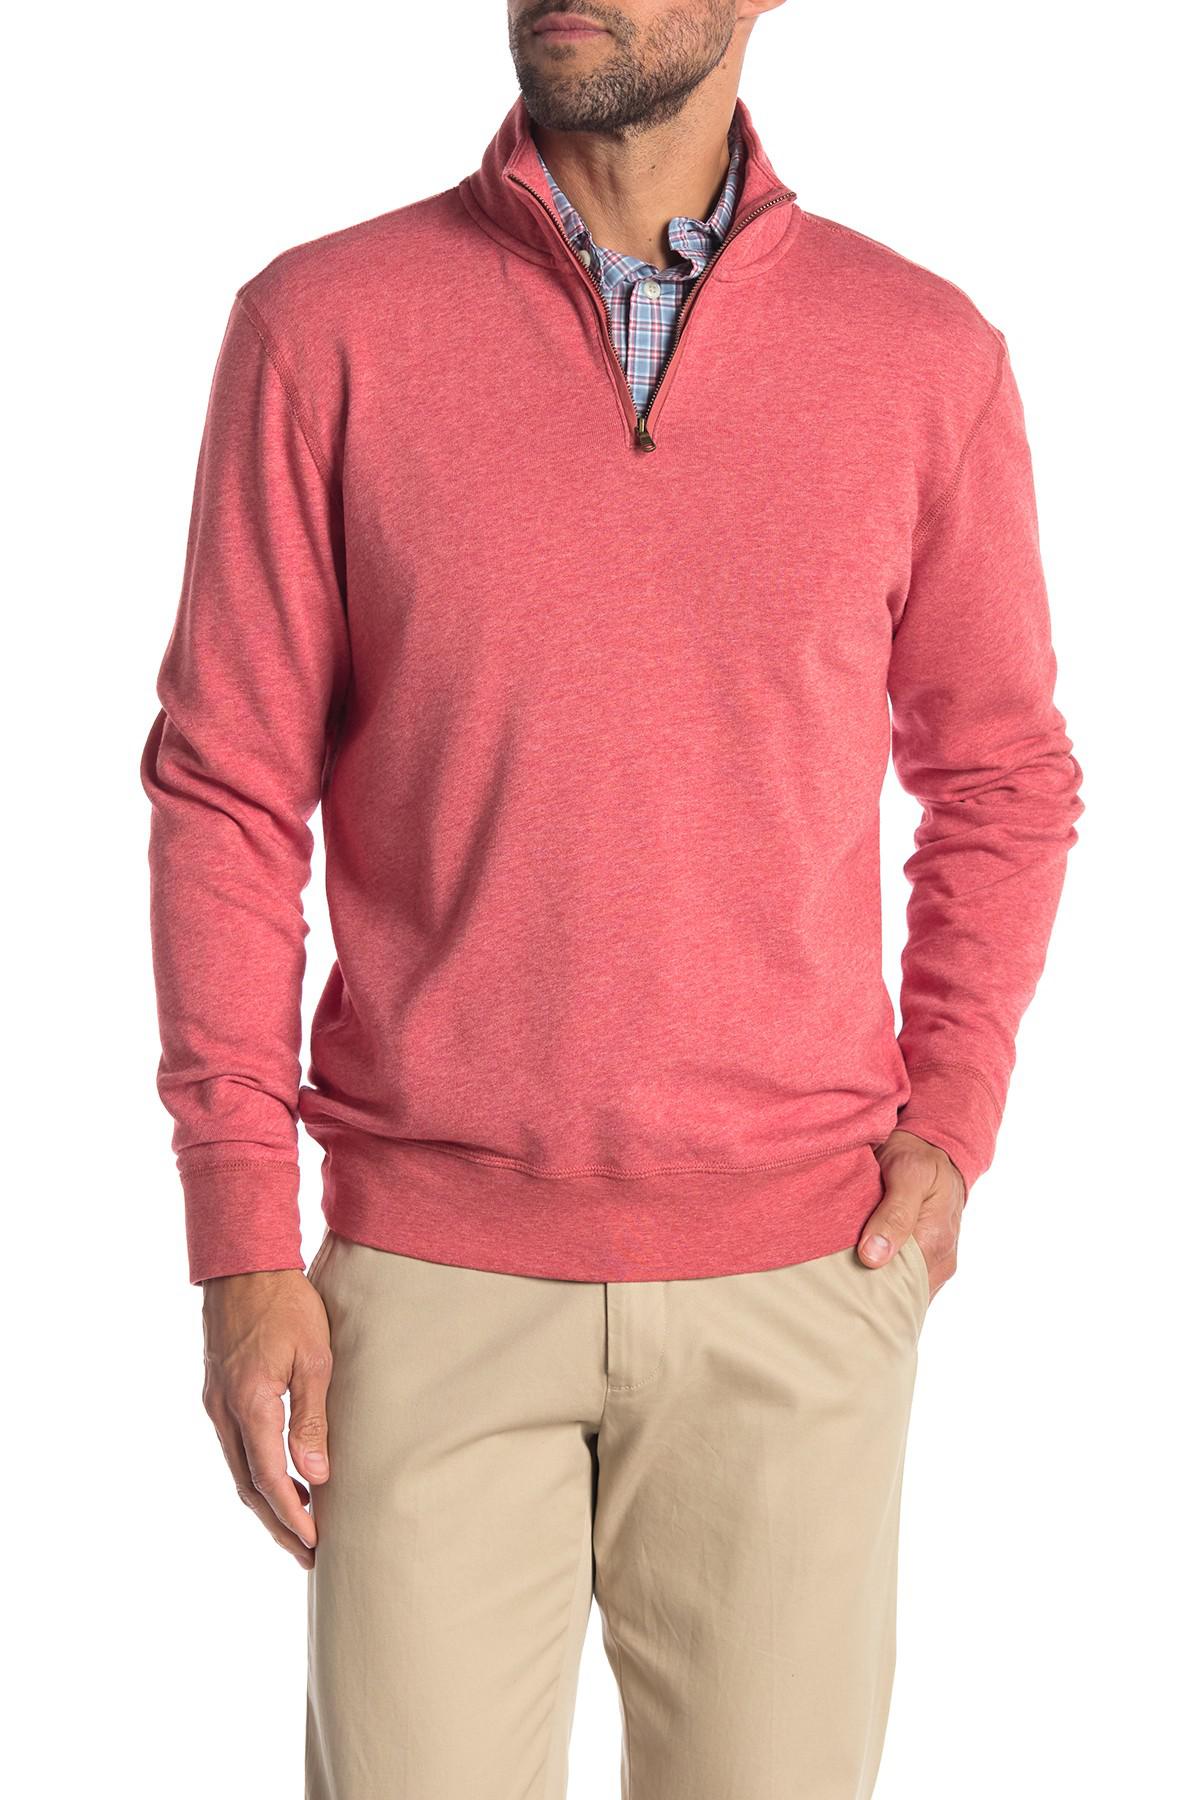 Faherty Brand Cotton Quarter Zip Sweater in Faded Red (Pink) for Men - Lyst